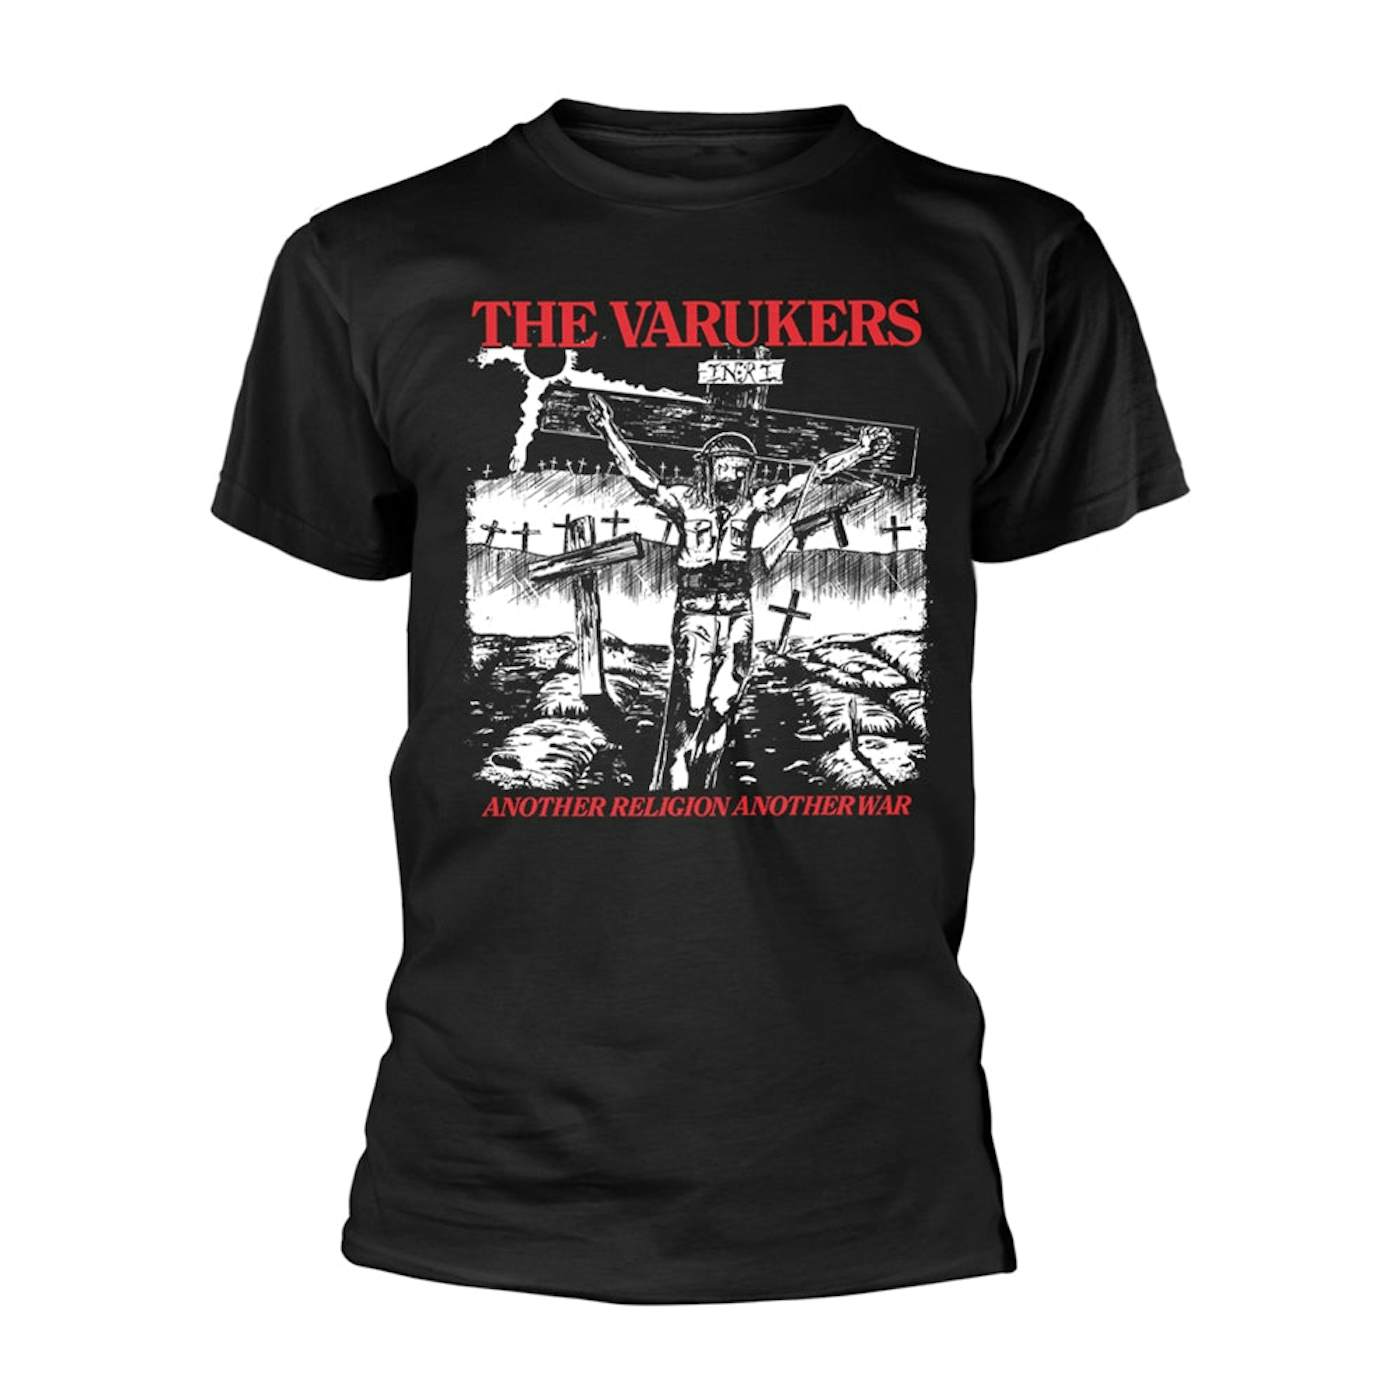 The Varukers T Shirt - Another Religion